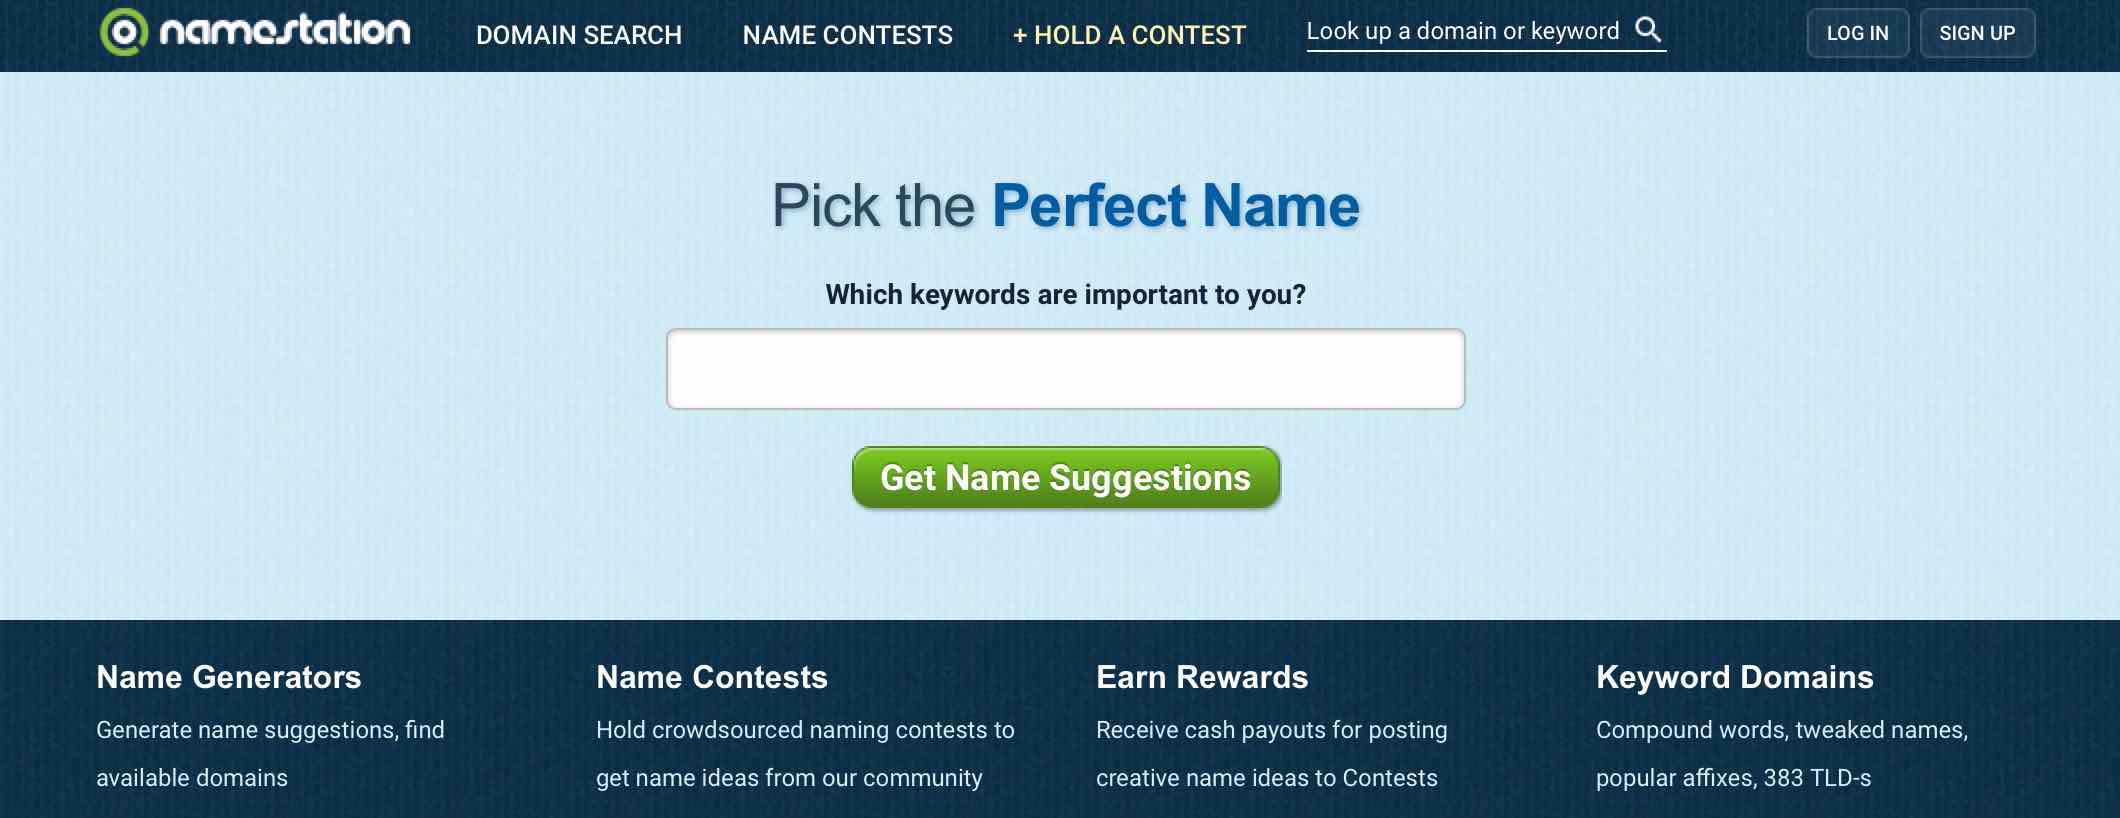 Intelligent domain search, instant check, crowdsourced name contests, keyword suggestions